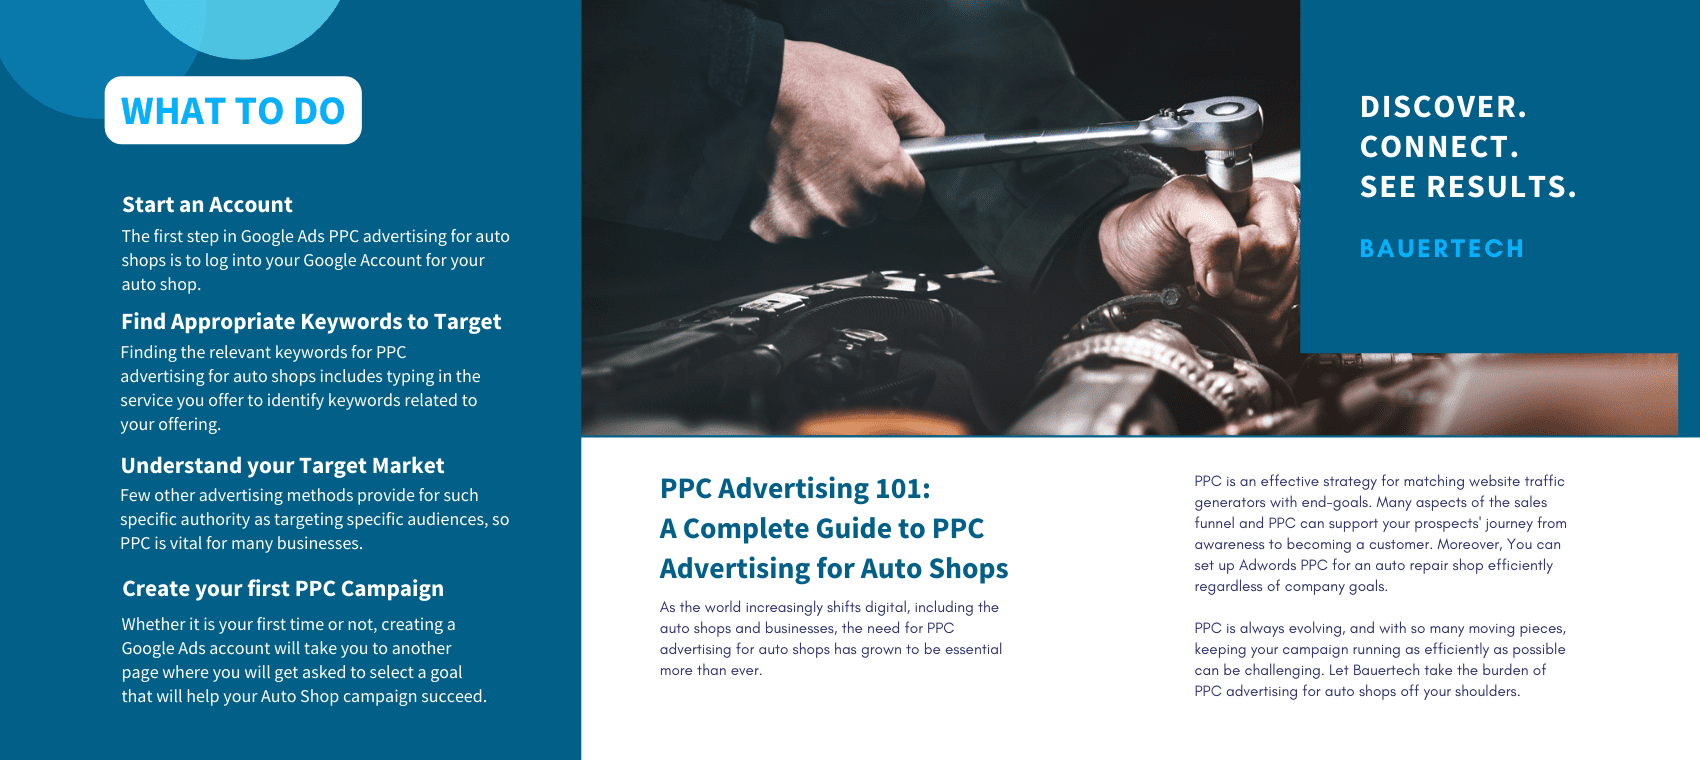 A complete breakdown for getting started with PPC Advertising for auto shops.